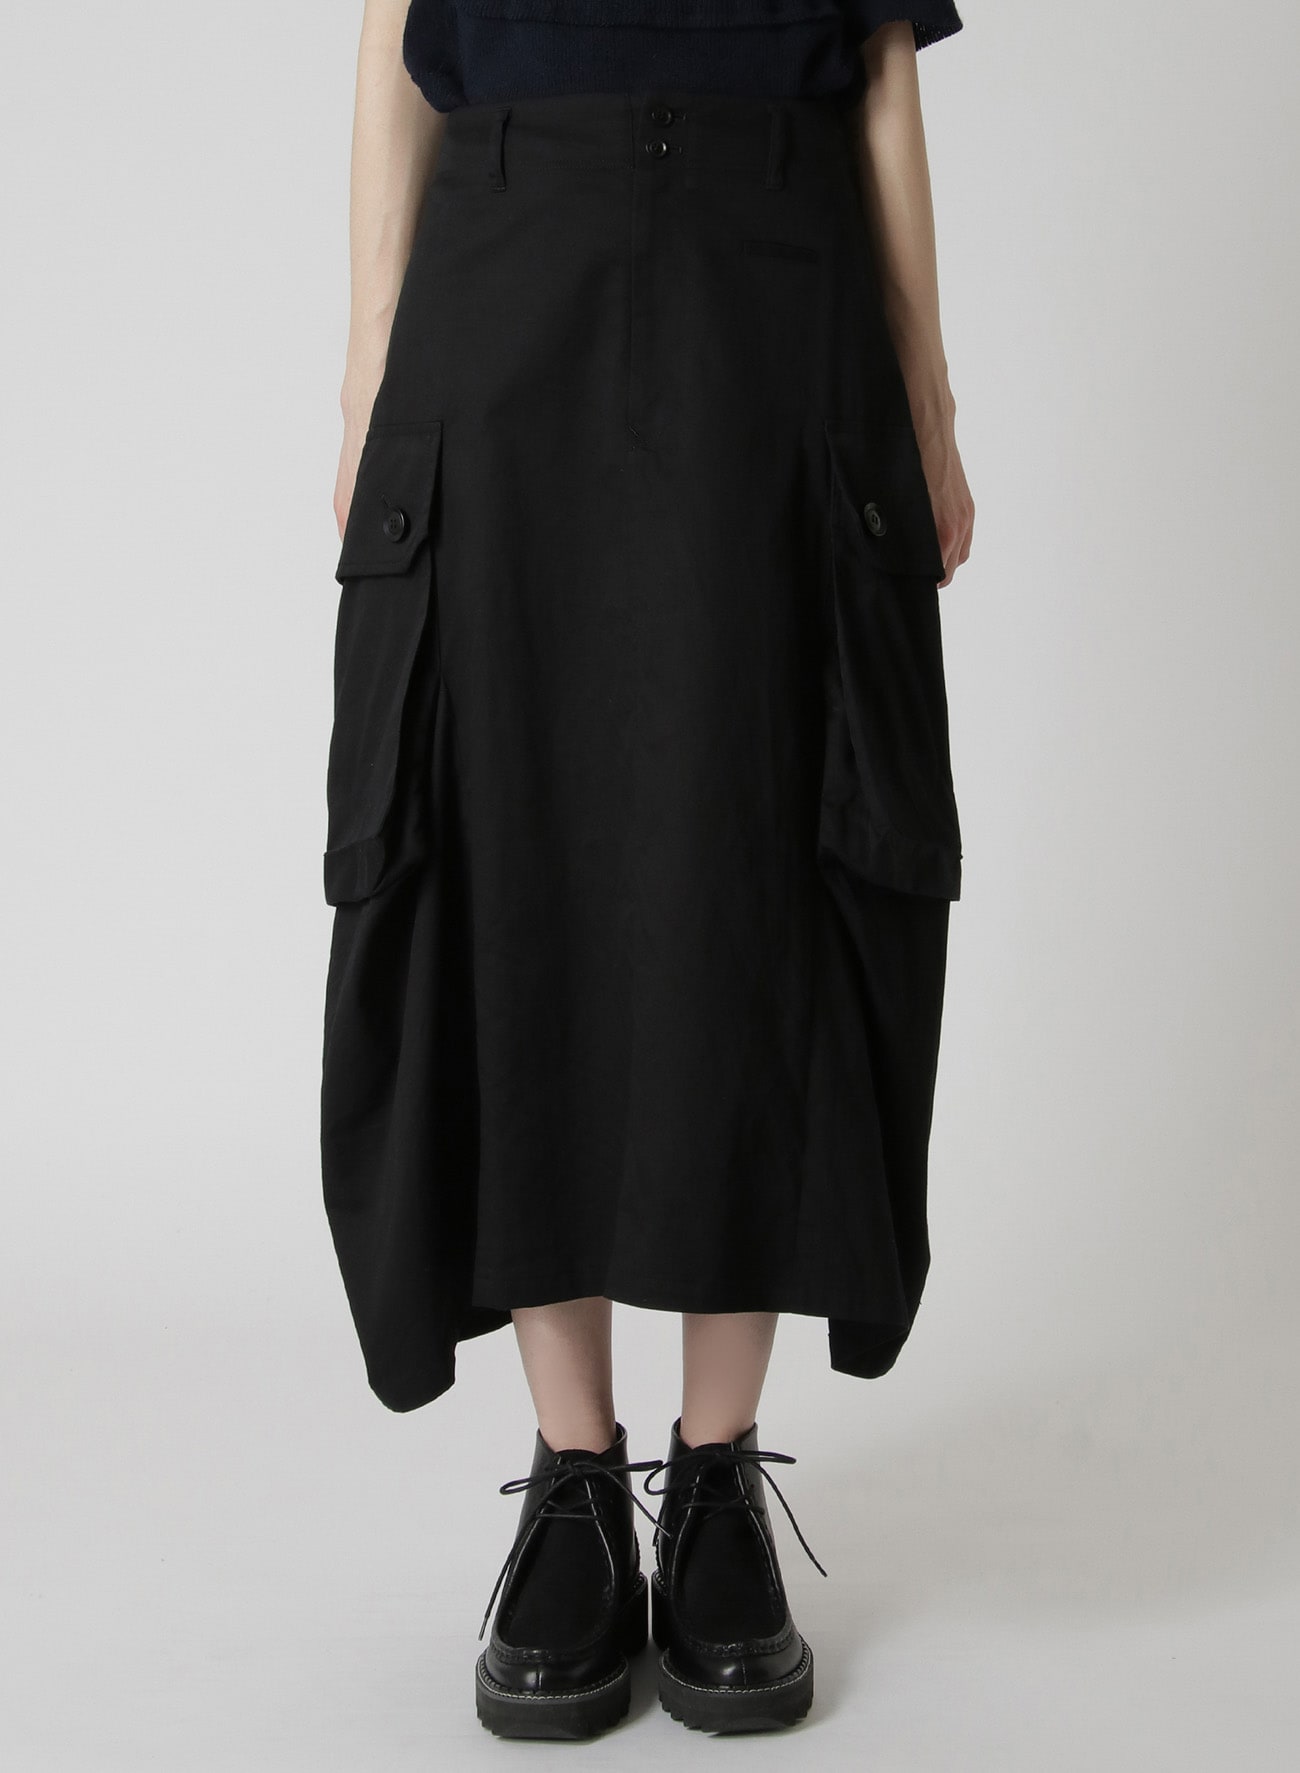 Y's BORN PRODUCT] COTTON TWILL CARGO PANTS-STYLE SKIRT(XS BLACK 